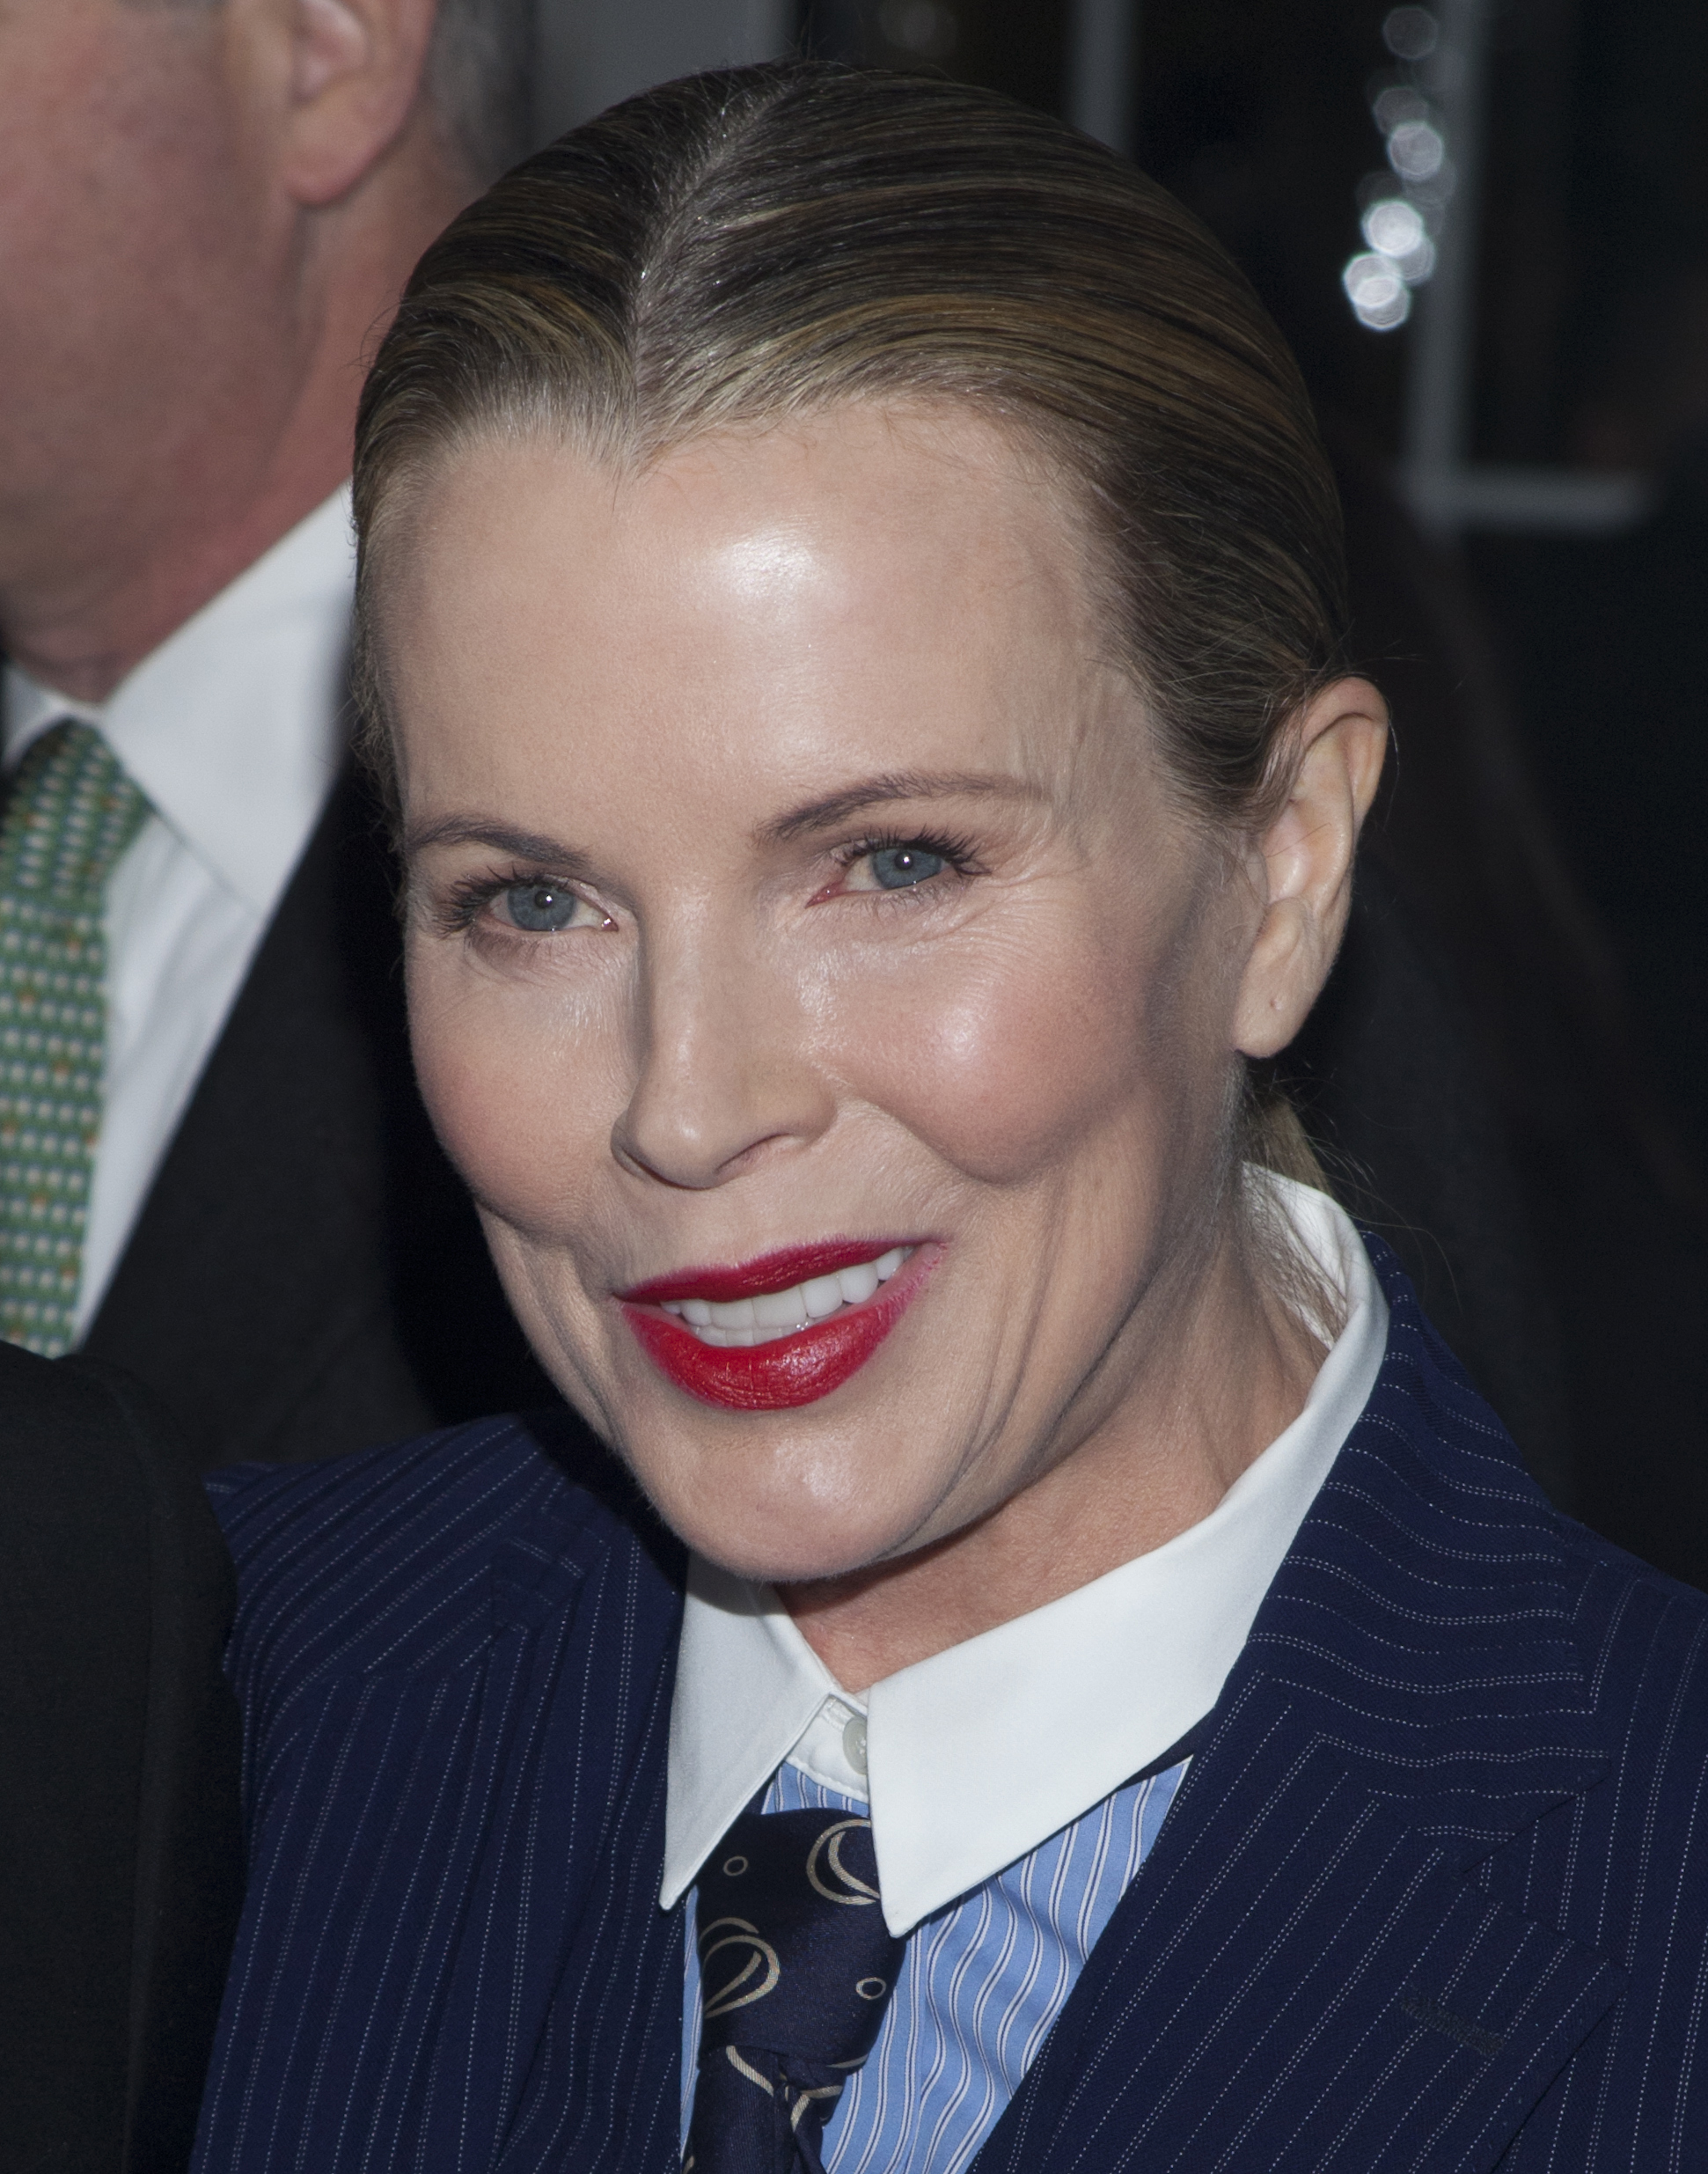 Kim Basinger at the "Grudge Match" screening in New York City, 2013 | Source: Getty Images